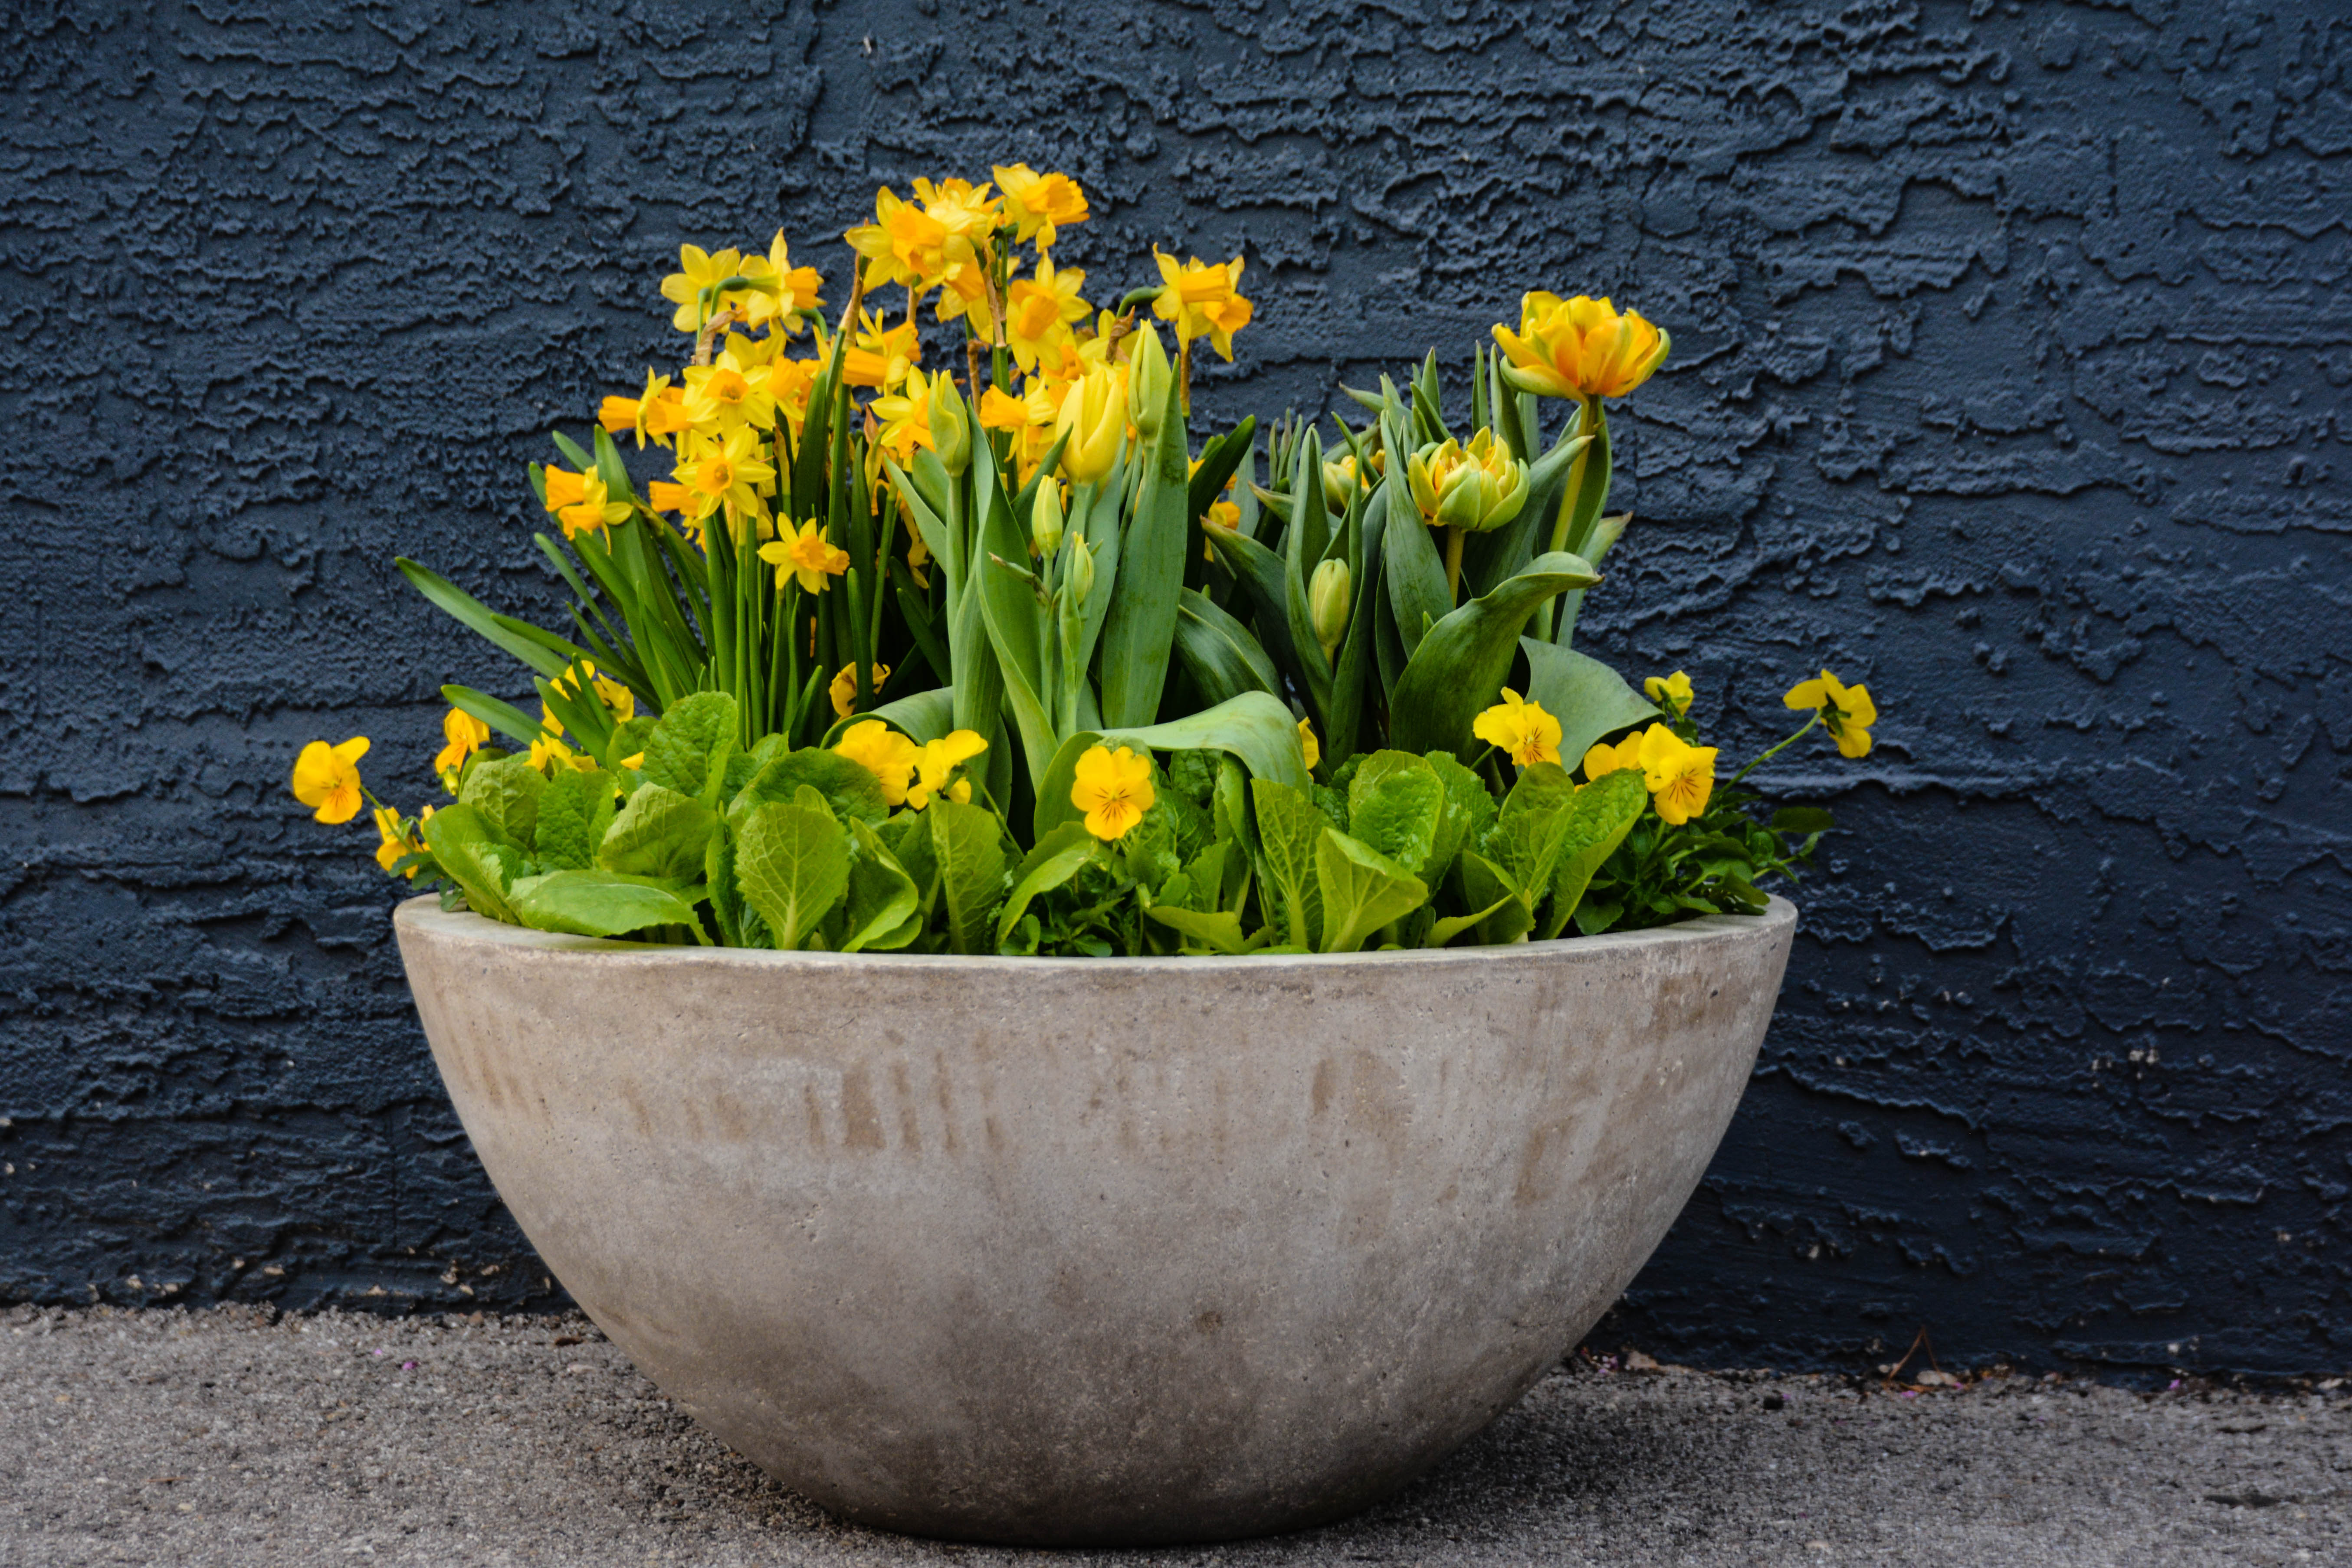 Spring Bulbs Inspiration from nature with daffodils, tulips and snowdrops - More on ThinkingOutsideTheBoxwood.com 